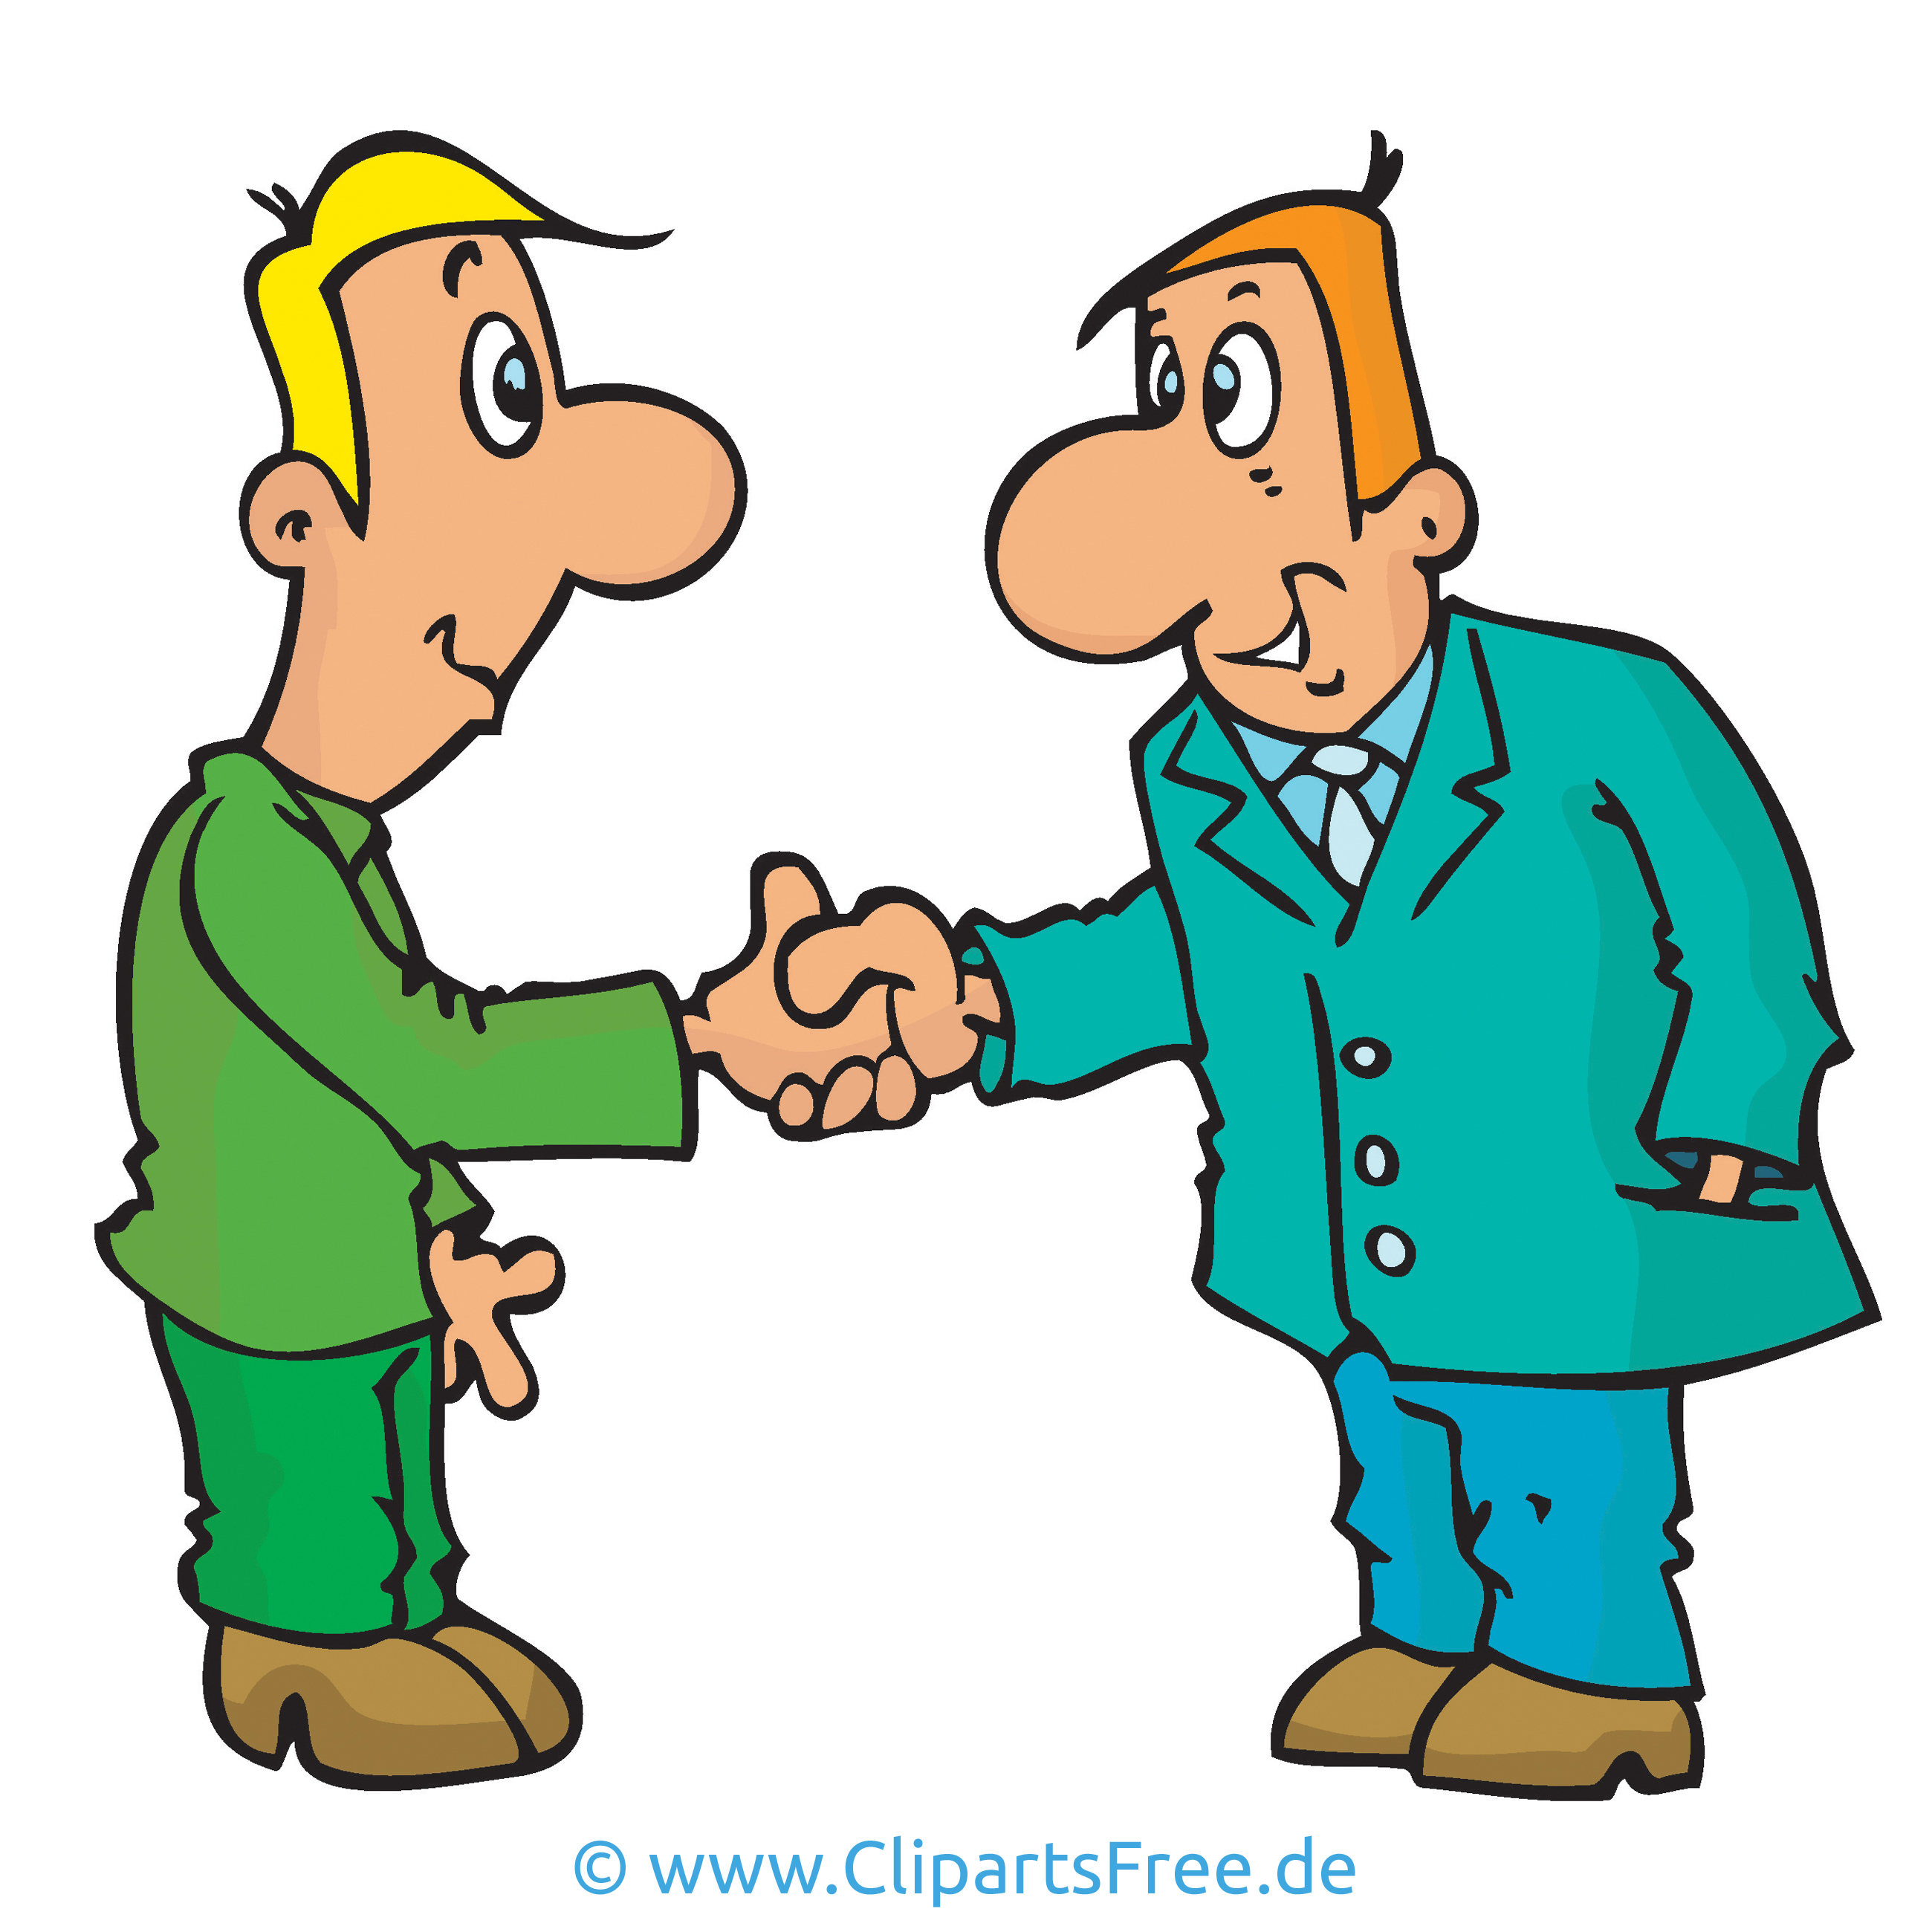 free animated meeting clipart - photo #23